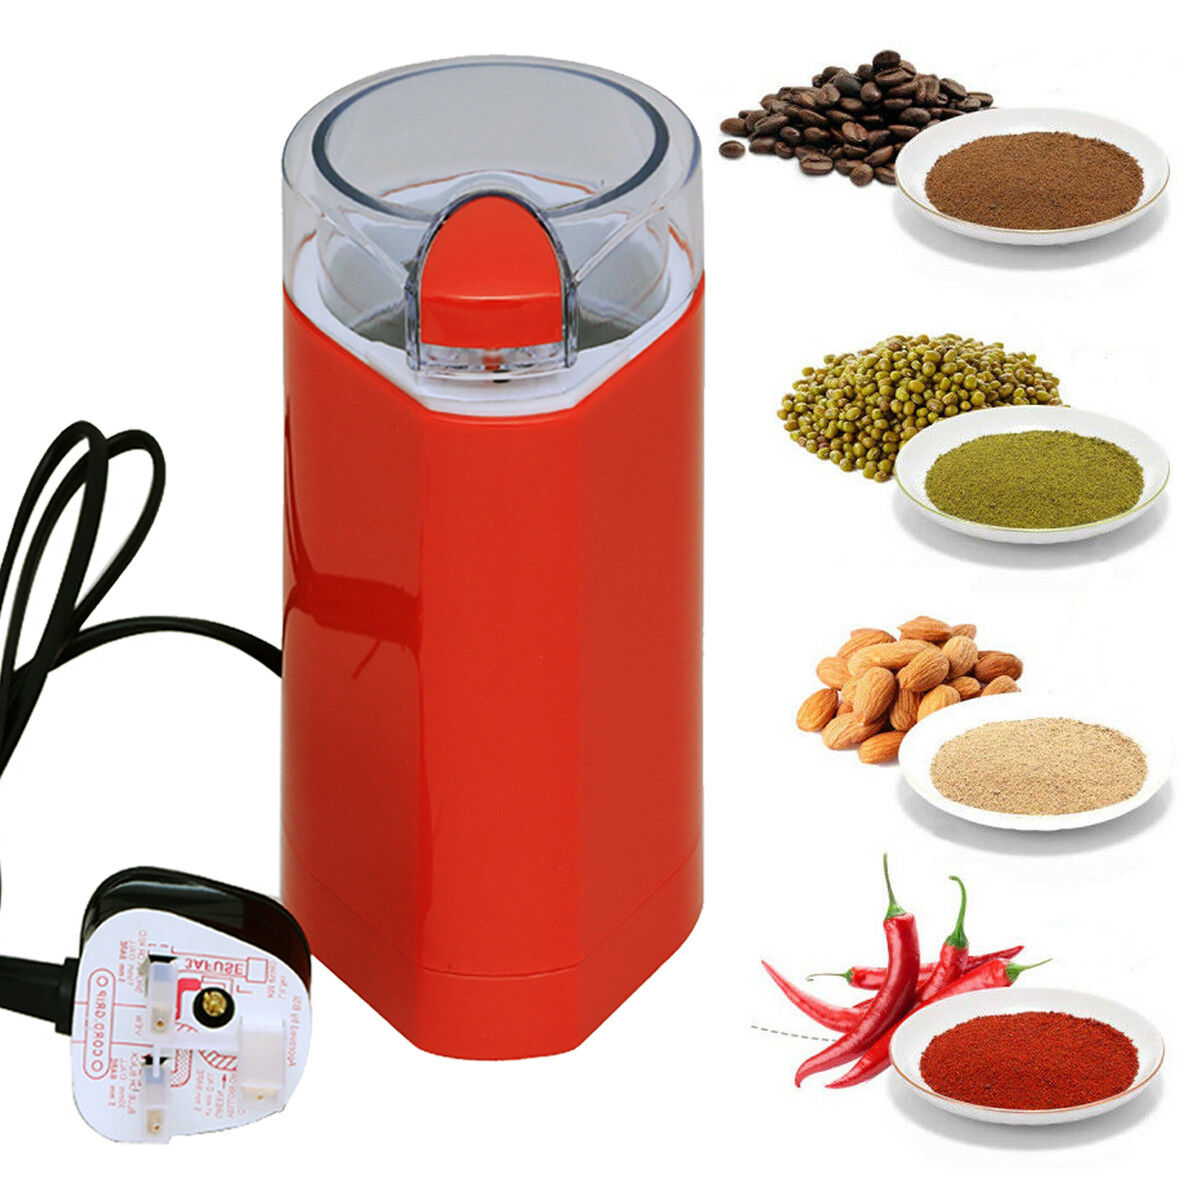 ELECTRIC BEAN & DRY COFFEE GRINDER Award-winning store WITH CLEAR Quantity limited CRUSHER RED MIXER